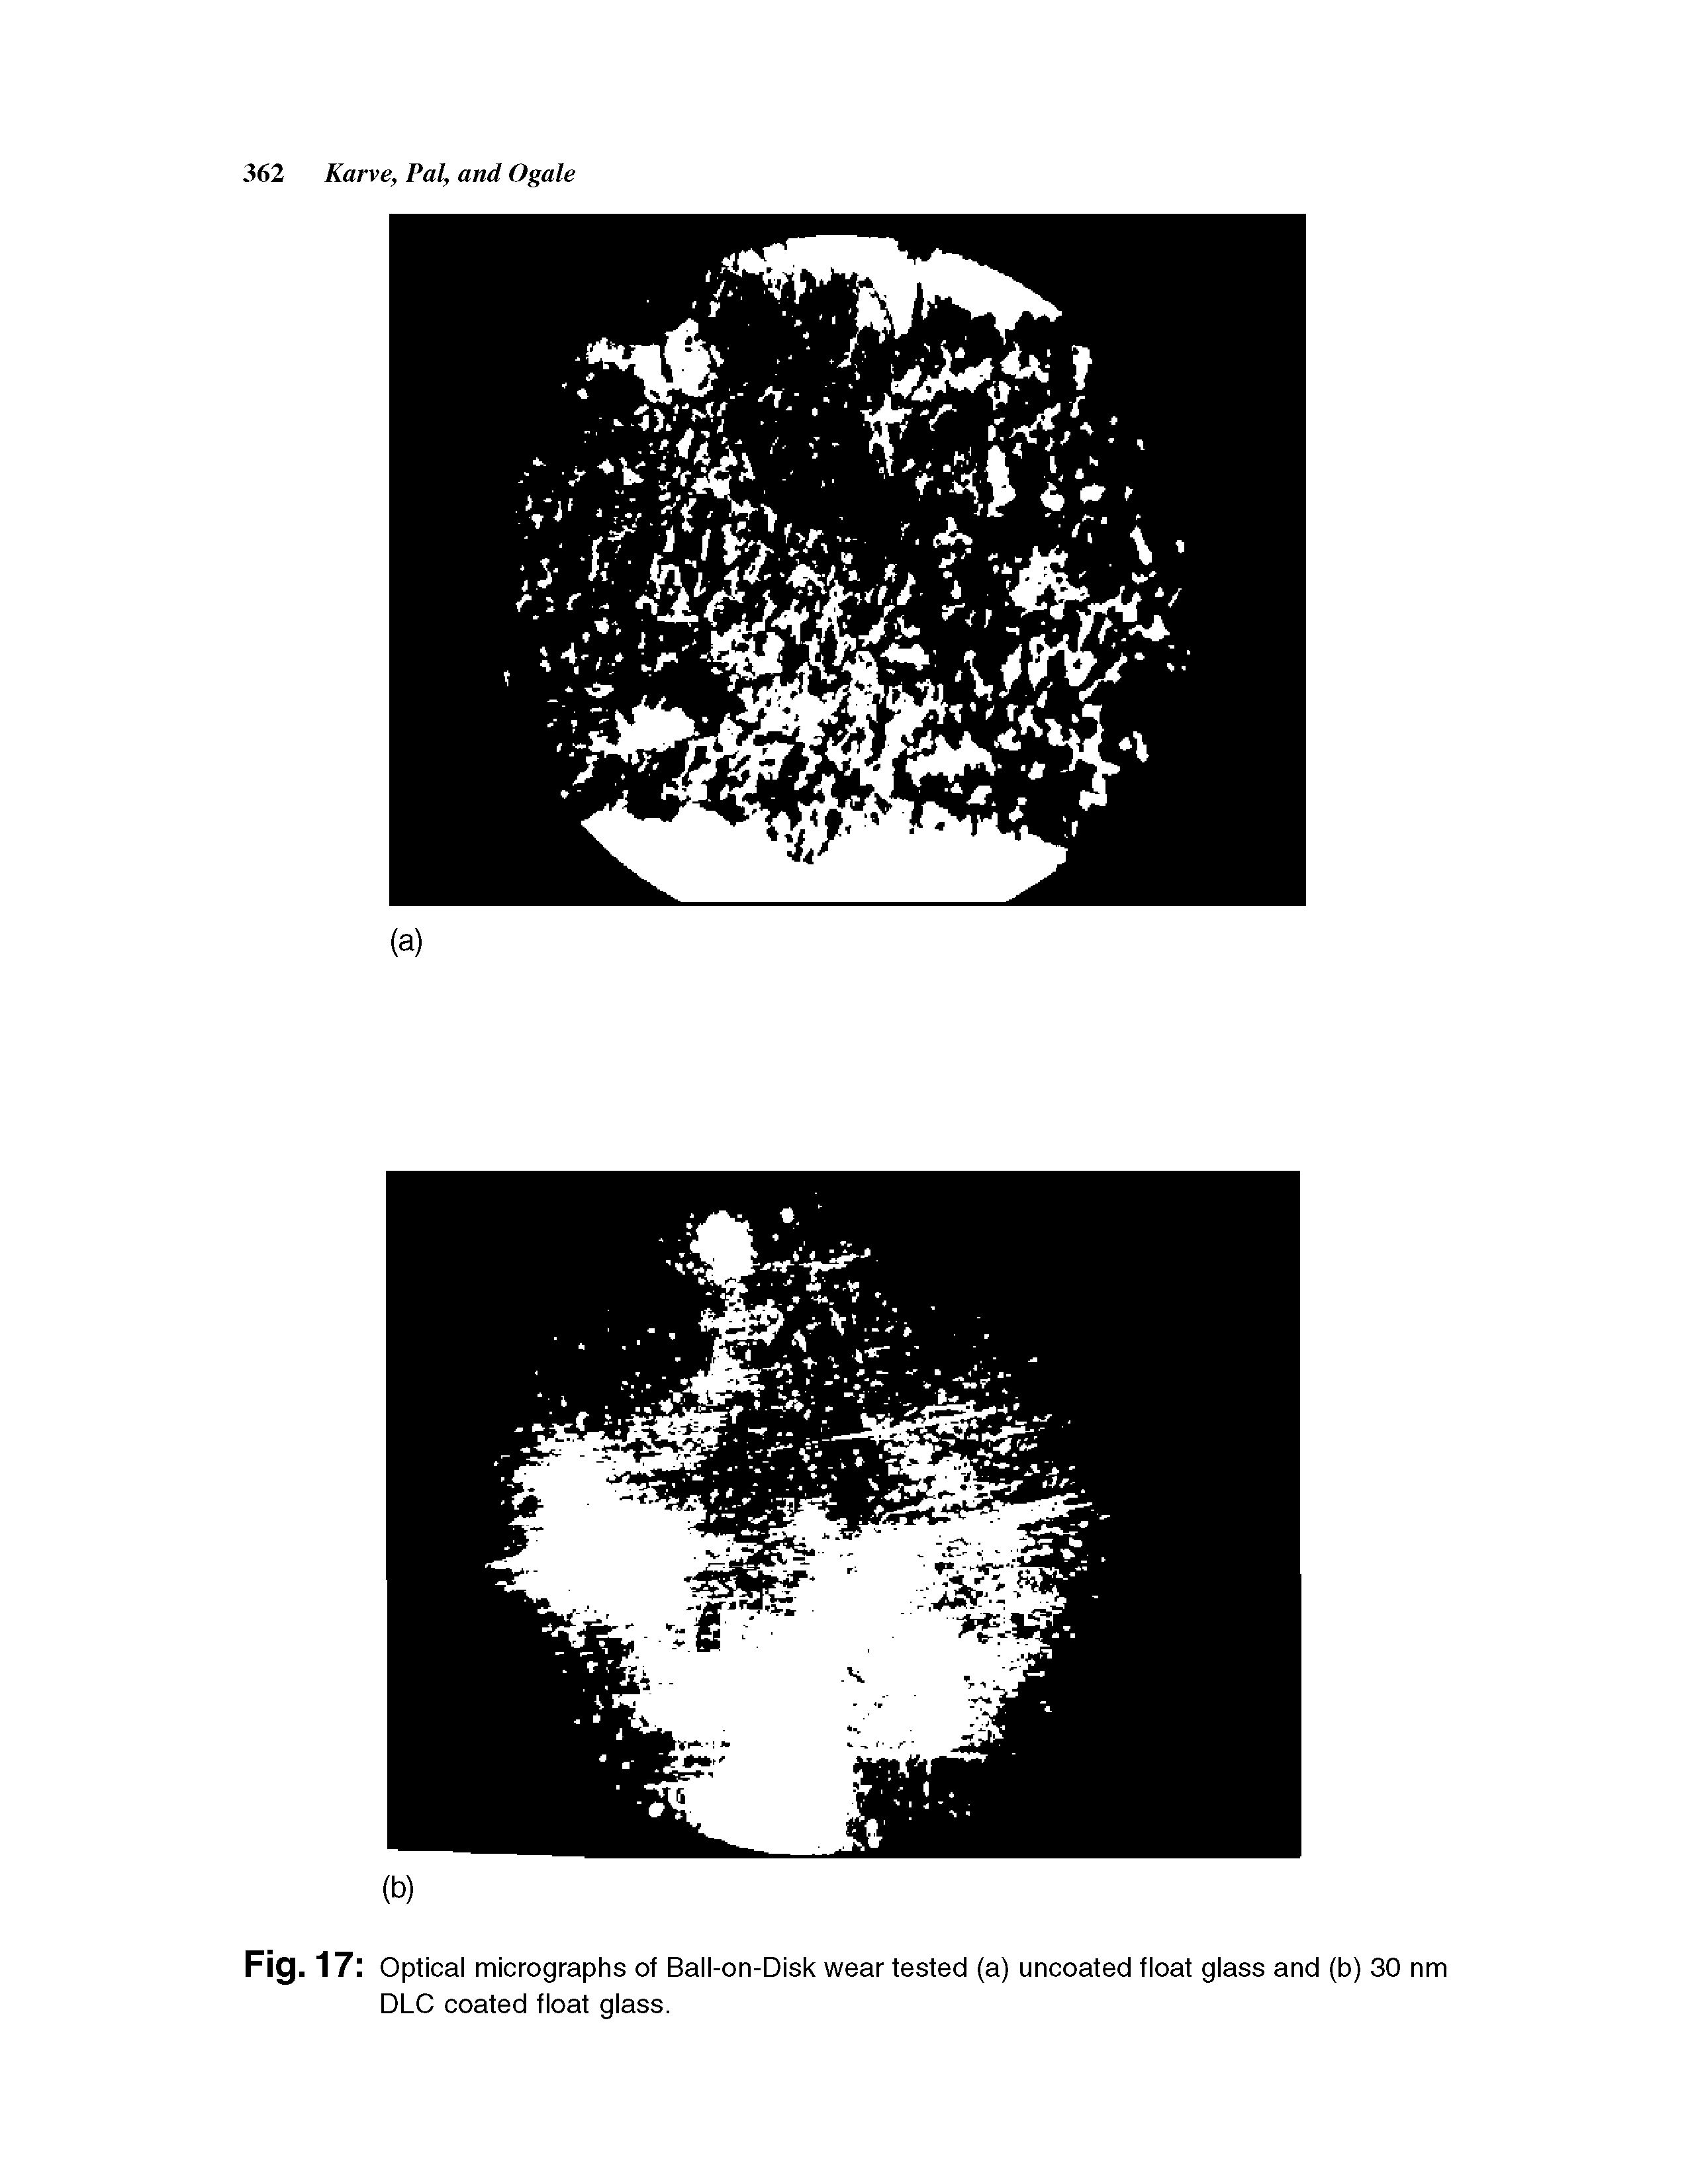 Fig. 17 Optical micrographs of Ball-on-Disk wear tested (a) uncoated float glass and (b) 30 nm DLC coated float glass.